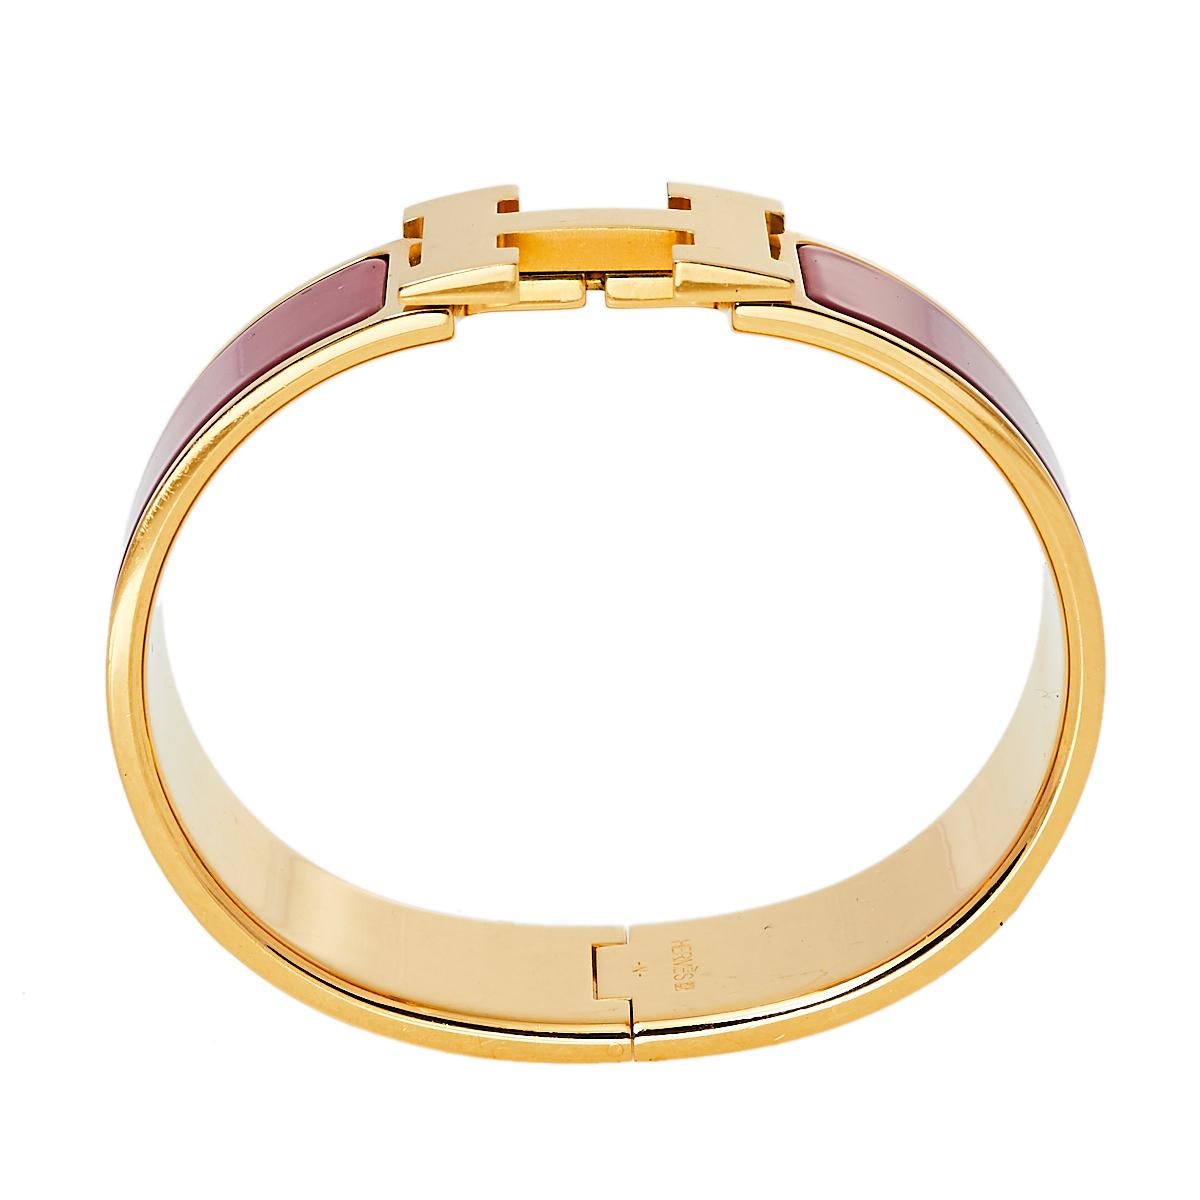 This elegant 'Clic Clac H' bracelet from the house of Hermès is designed in a wide silhouette. It features a gold-plated body with red enamel on it and the iconic 'H' logo swivel at the center. Wear it with your favorite watch or as a solo piece.

